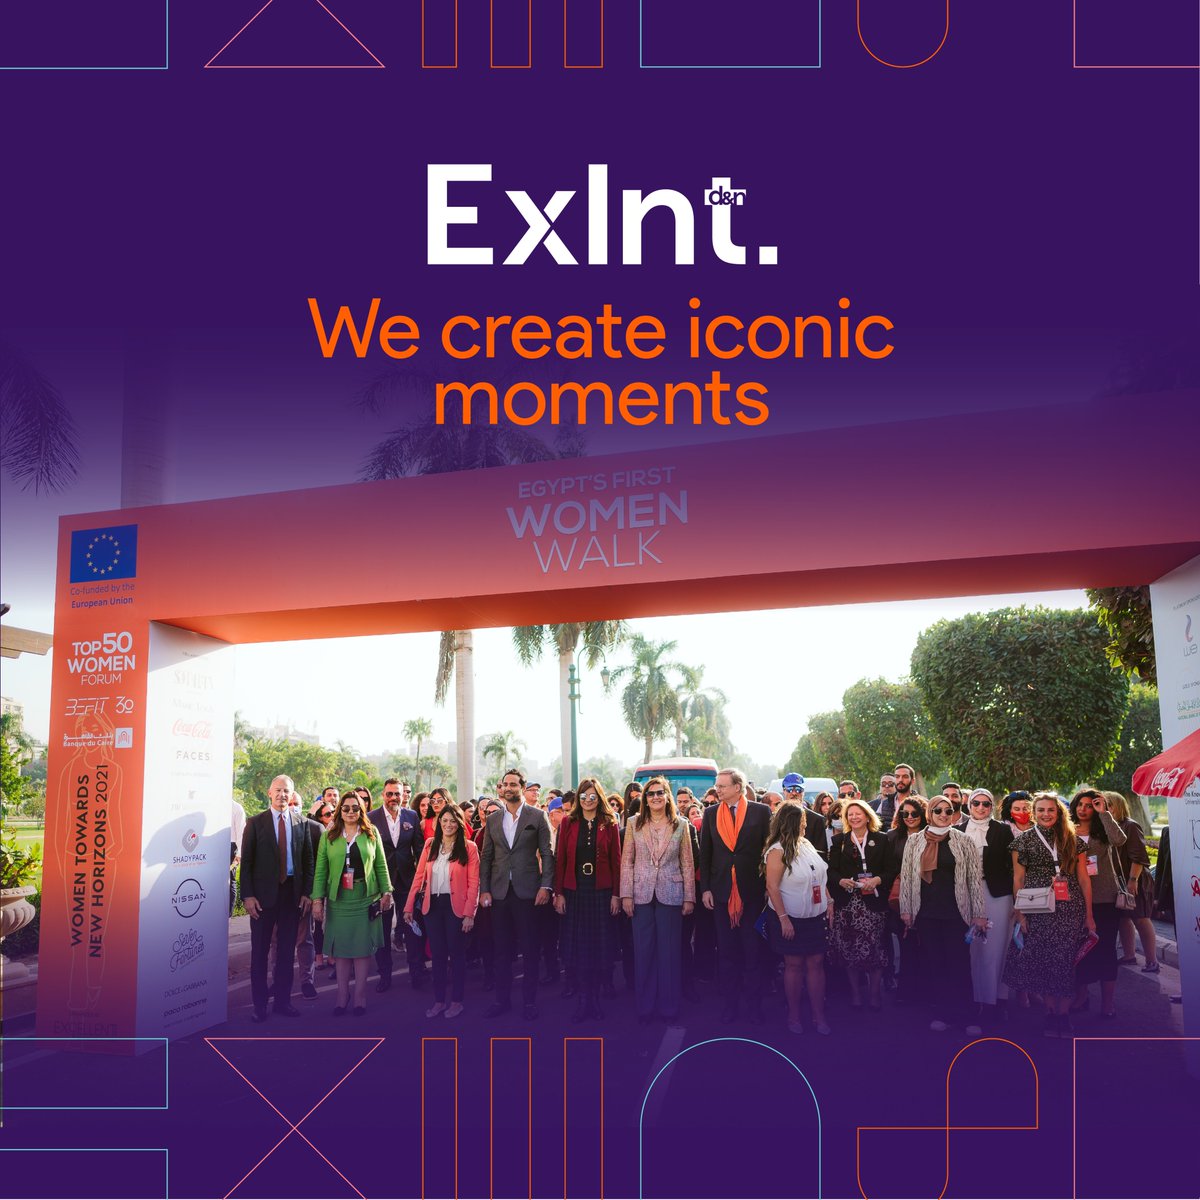 We are proud to have been a part of “Women’s First Walk” in honor of the #16daysofactivism and this year we are #planning something #bigger with @Top50WomenForum 
Excited to learn more? Stay tuned!
DM us your request, or contact us
#ExlntCommunications
#DefiningWhatsNext